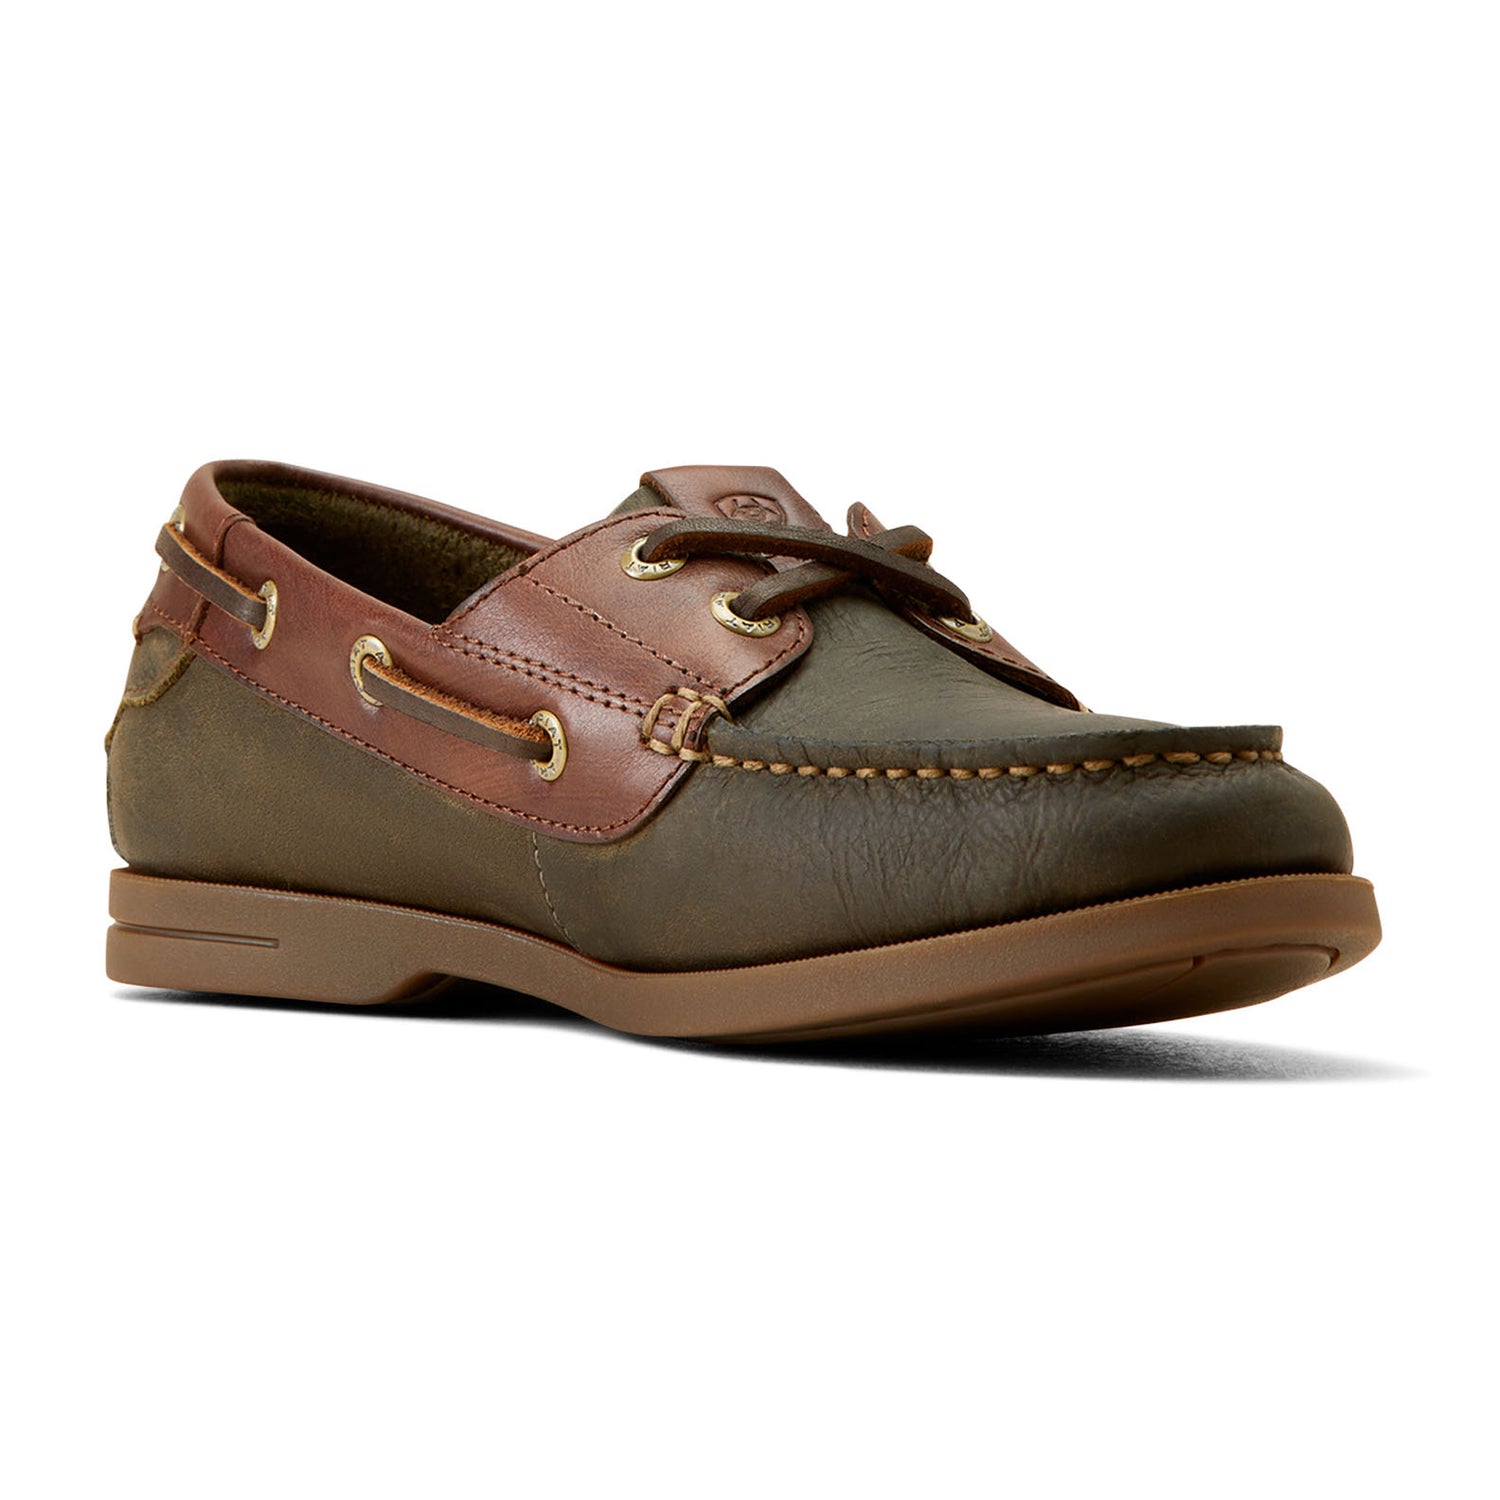 Ariat Womens Antigua Boat Shoes